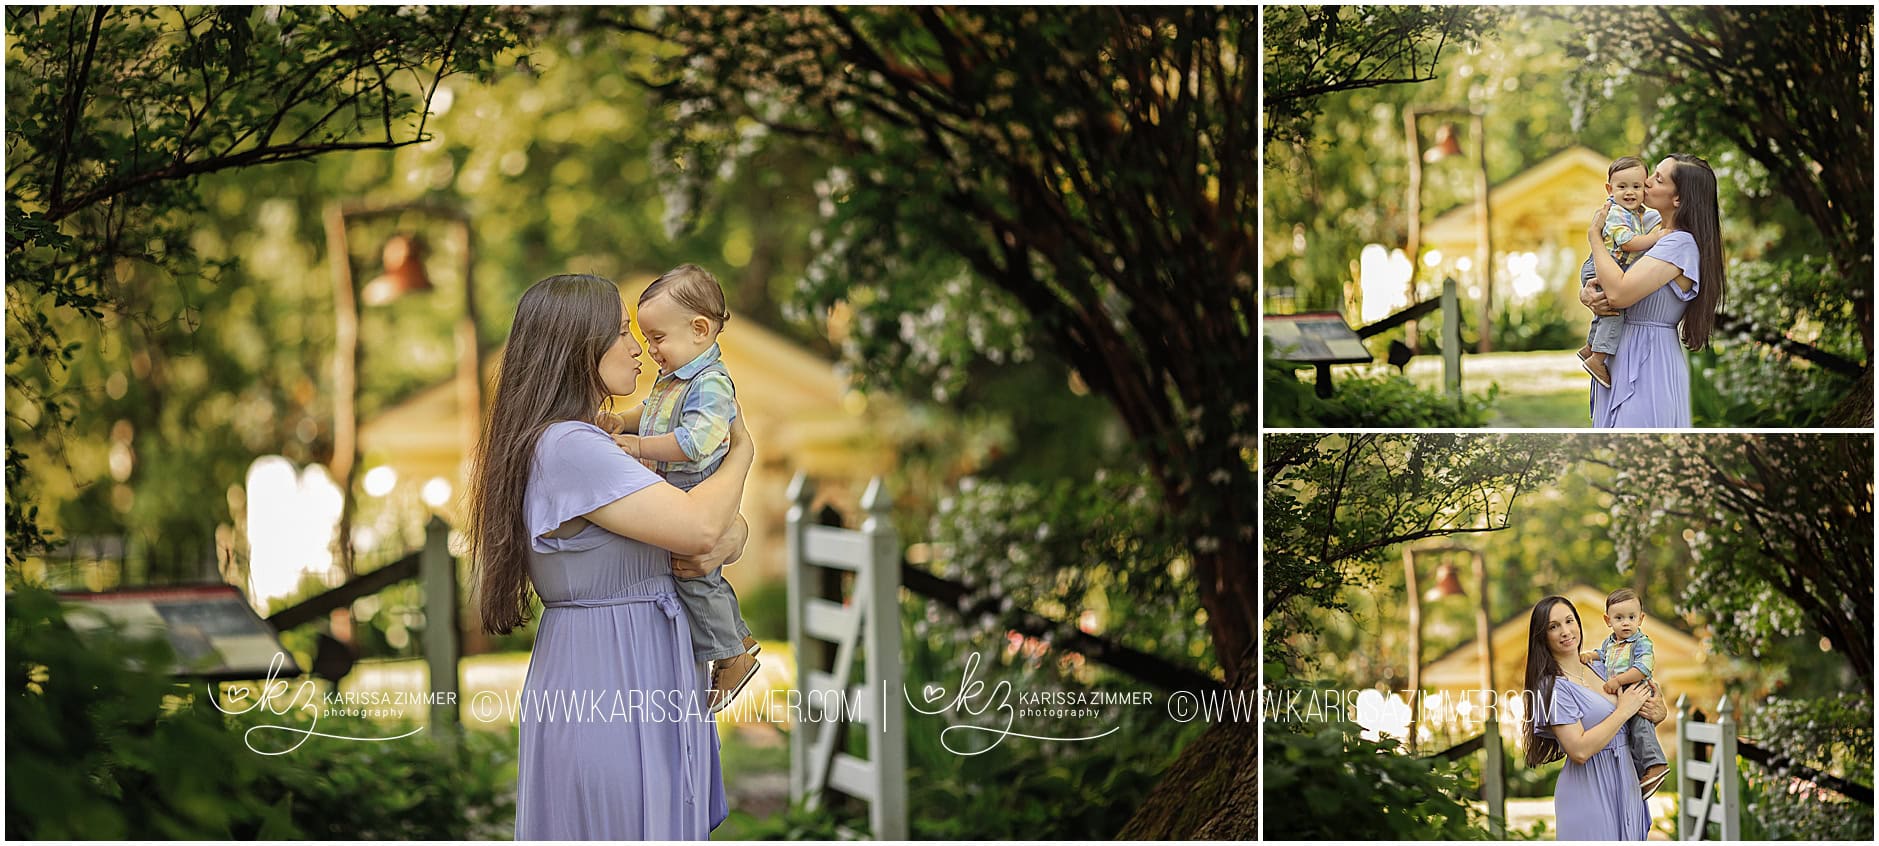 Harrisburg PA Family Photography is for Nontraditional Families Too ...